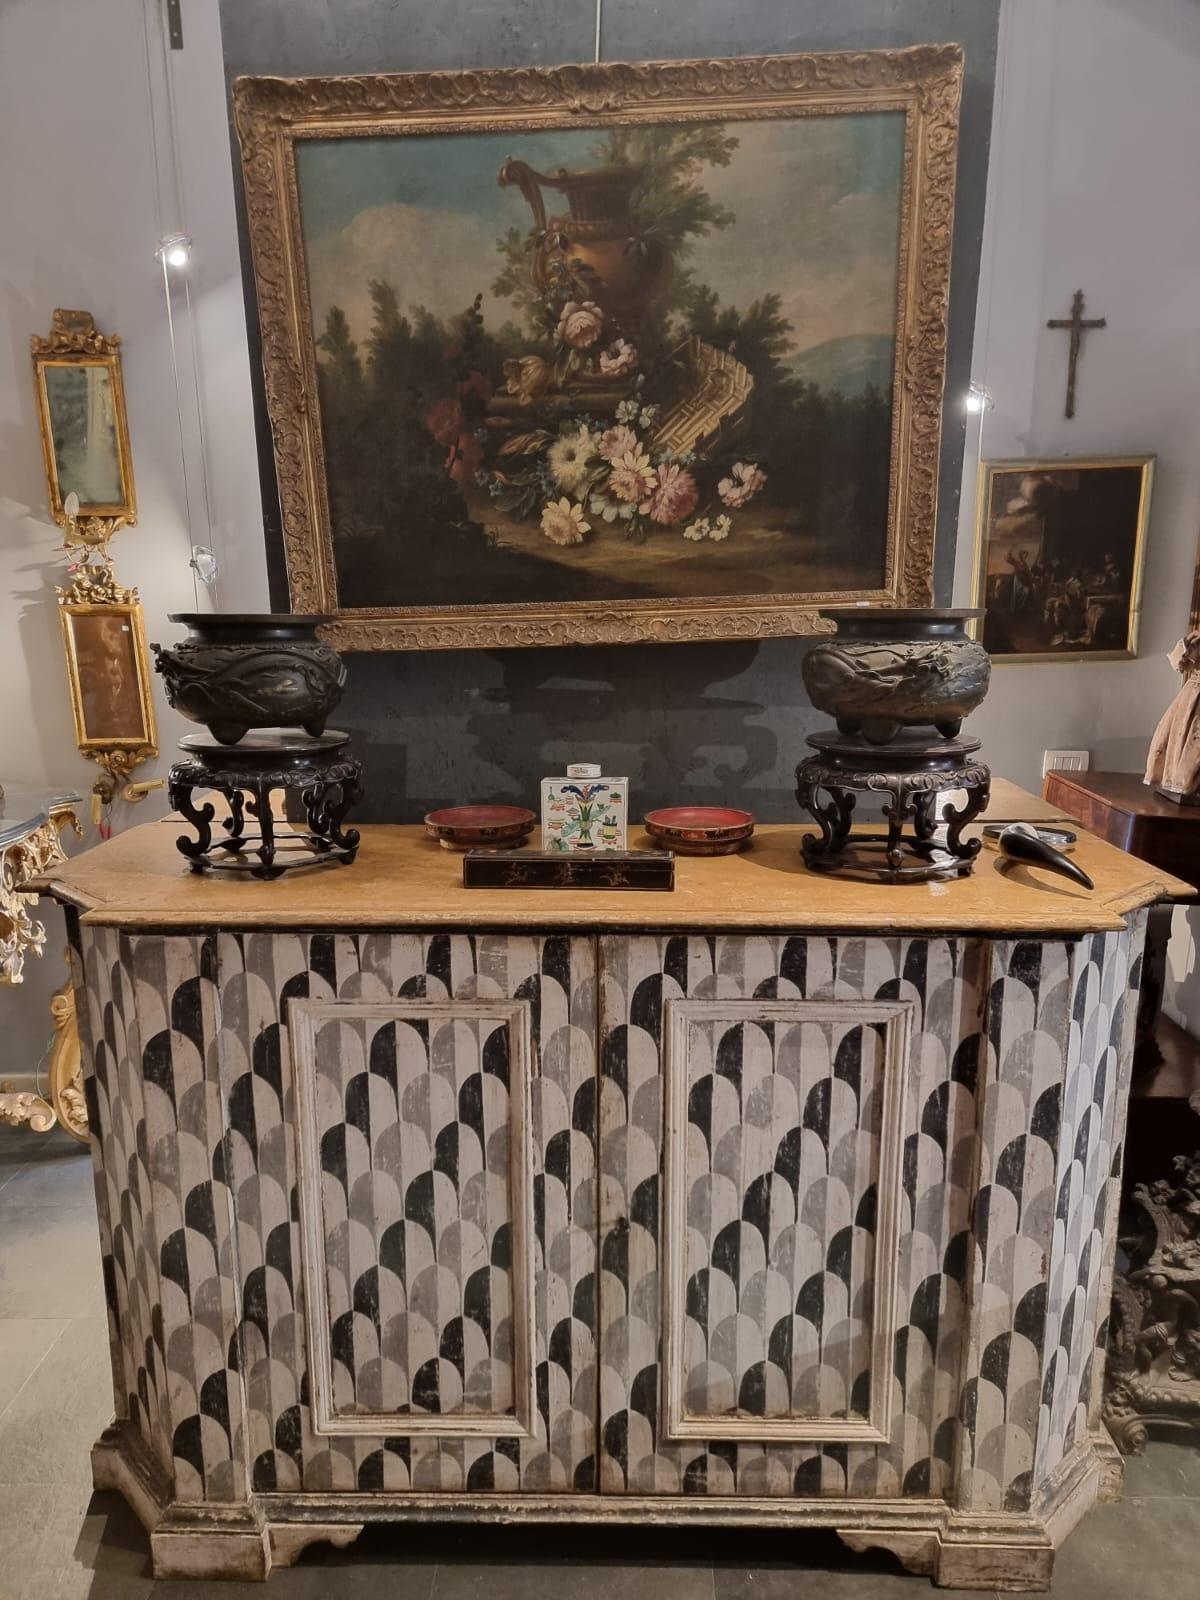 Beautiful pair of sideboards in mixed woods from 18th century.
The furniture itself is original but the painting is not original. The particular is that these sideboards have an internal drawer. 
Moreover thanks to their shape it gives a sense of